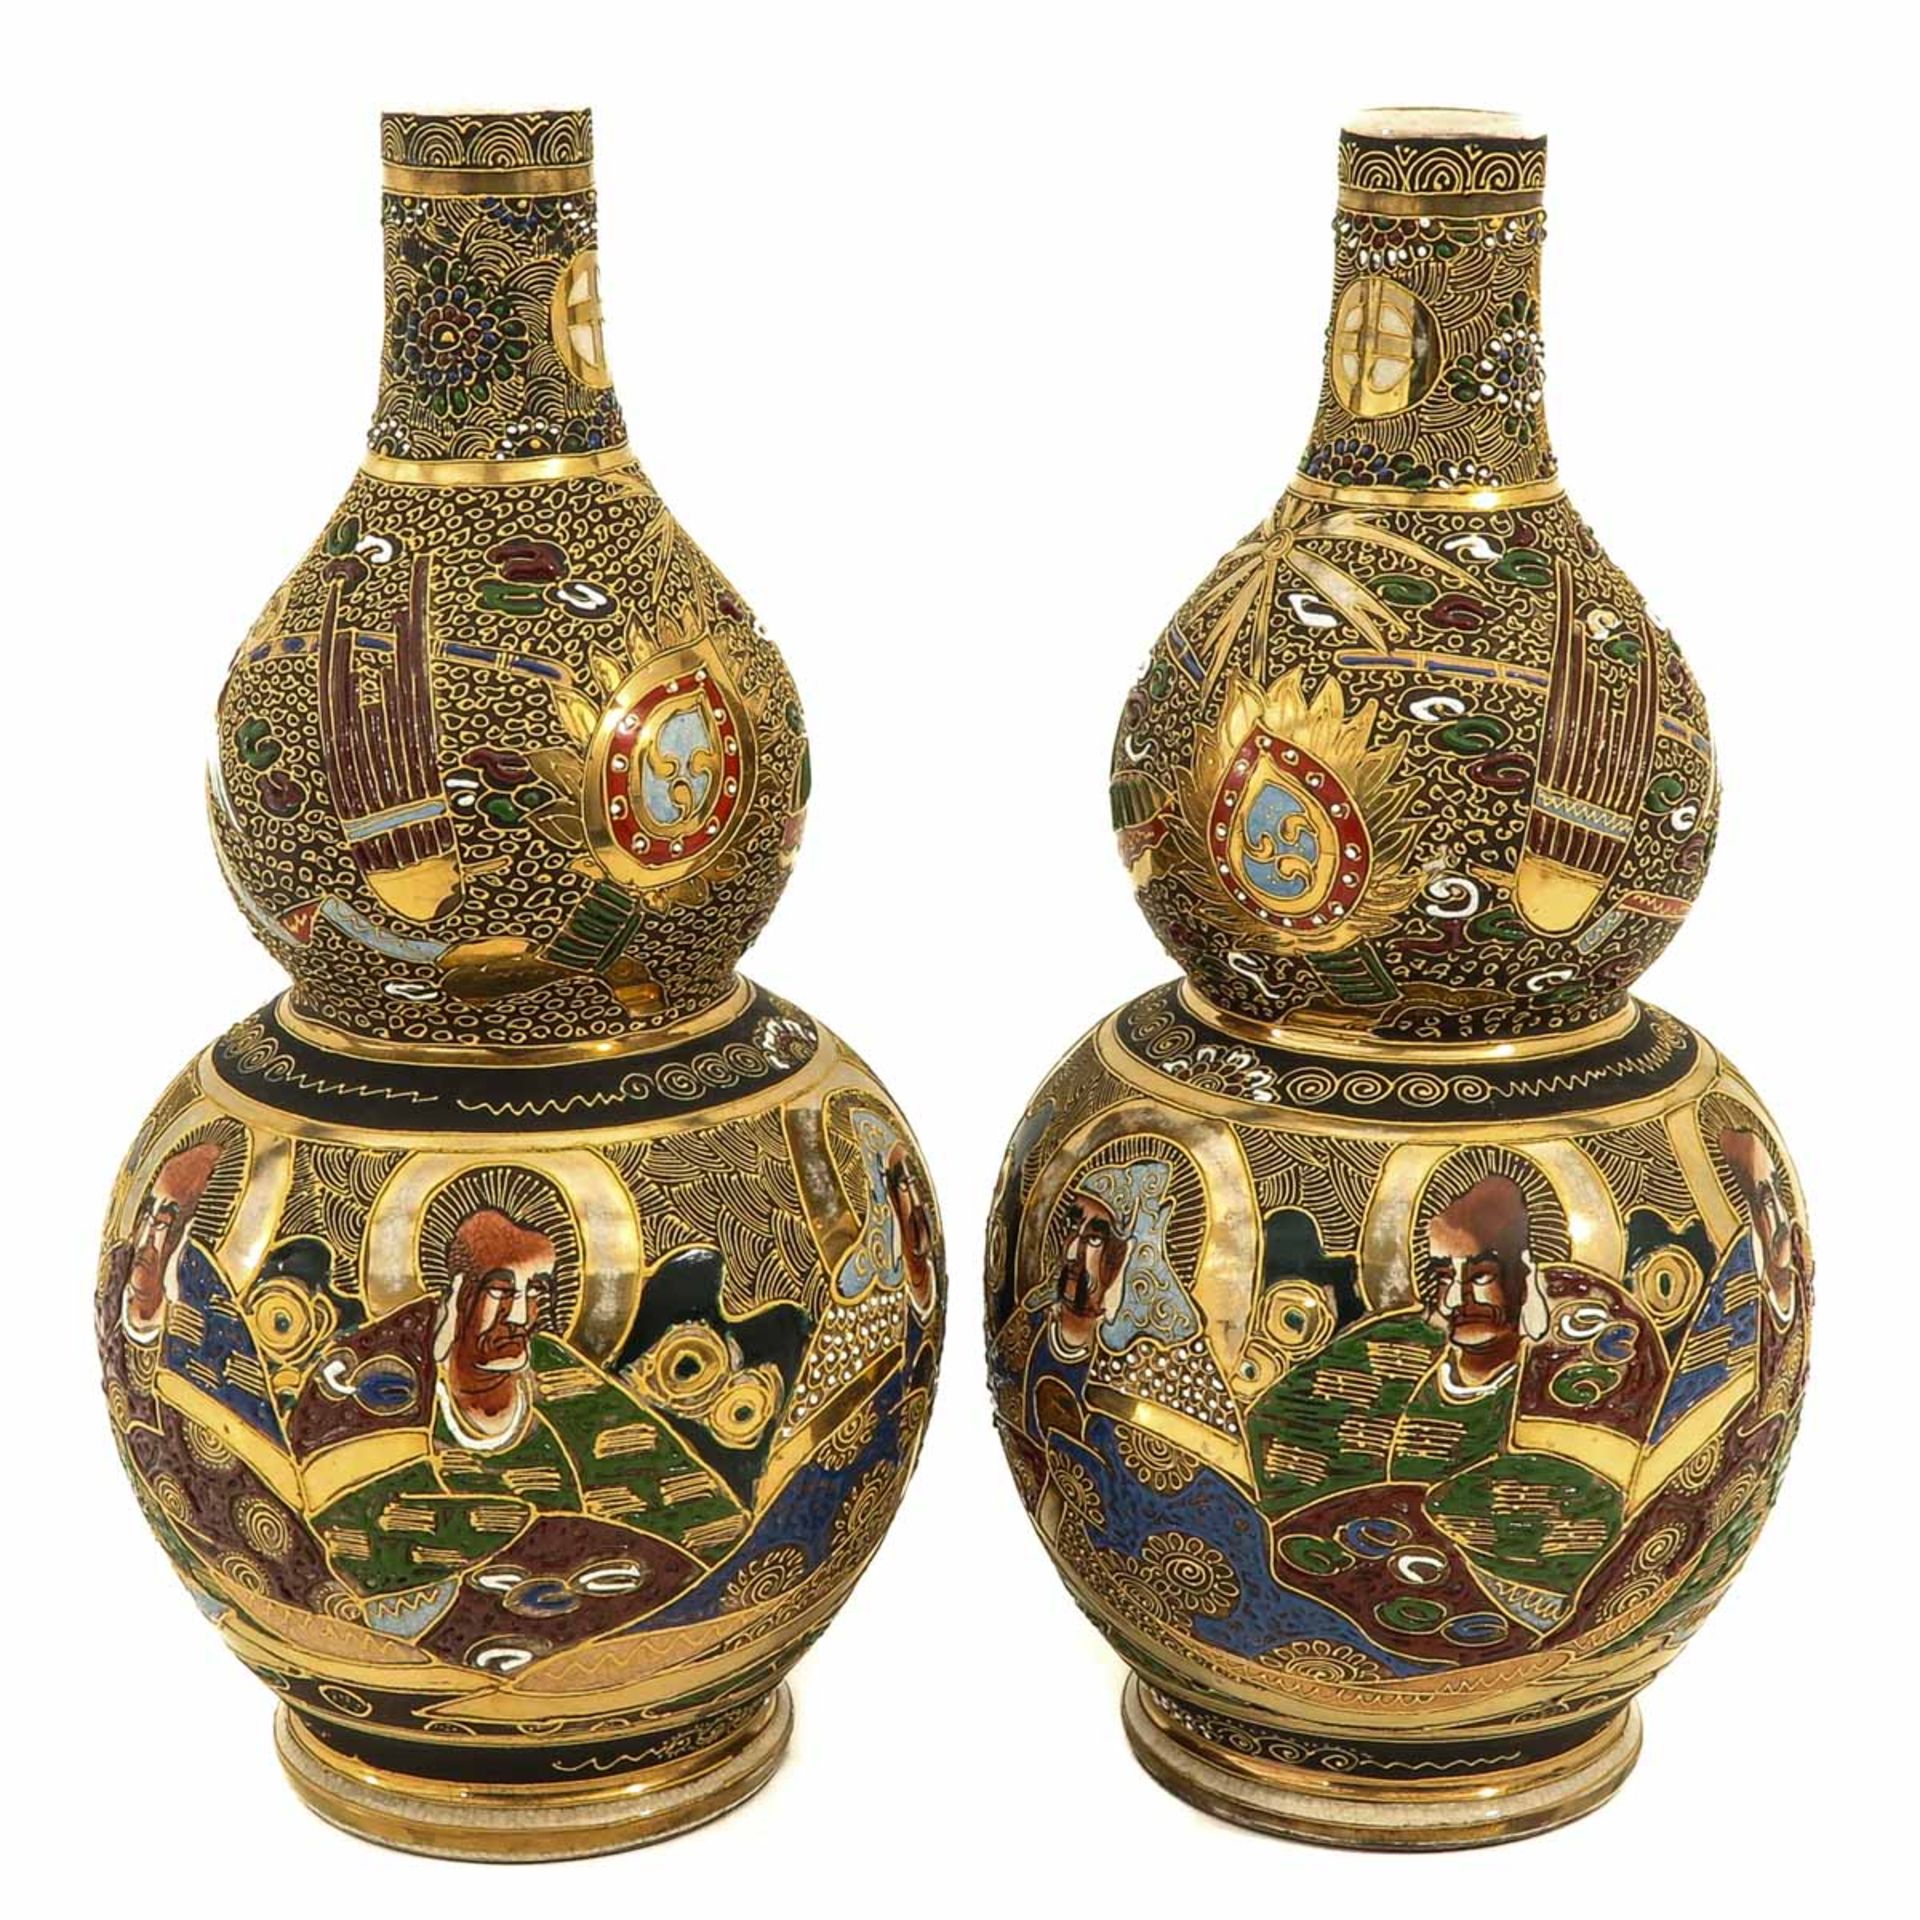 A Pair of Satsuma Gourd Vases